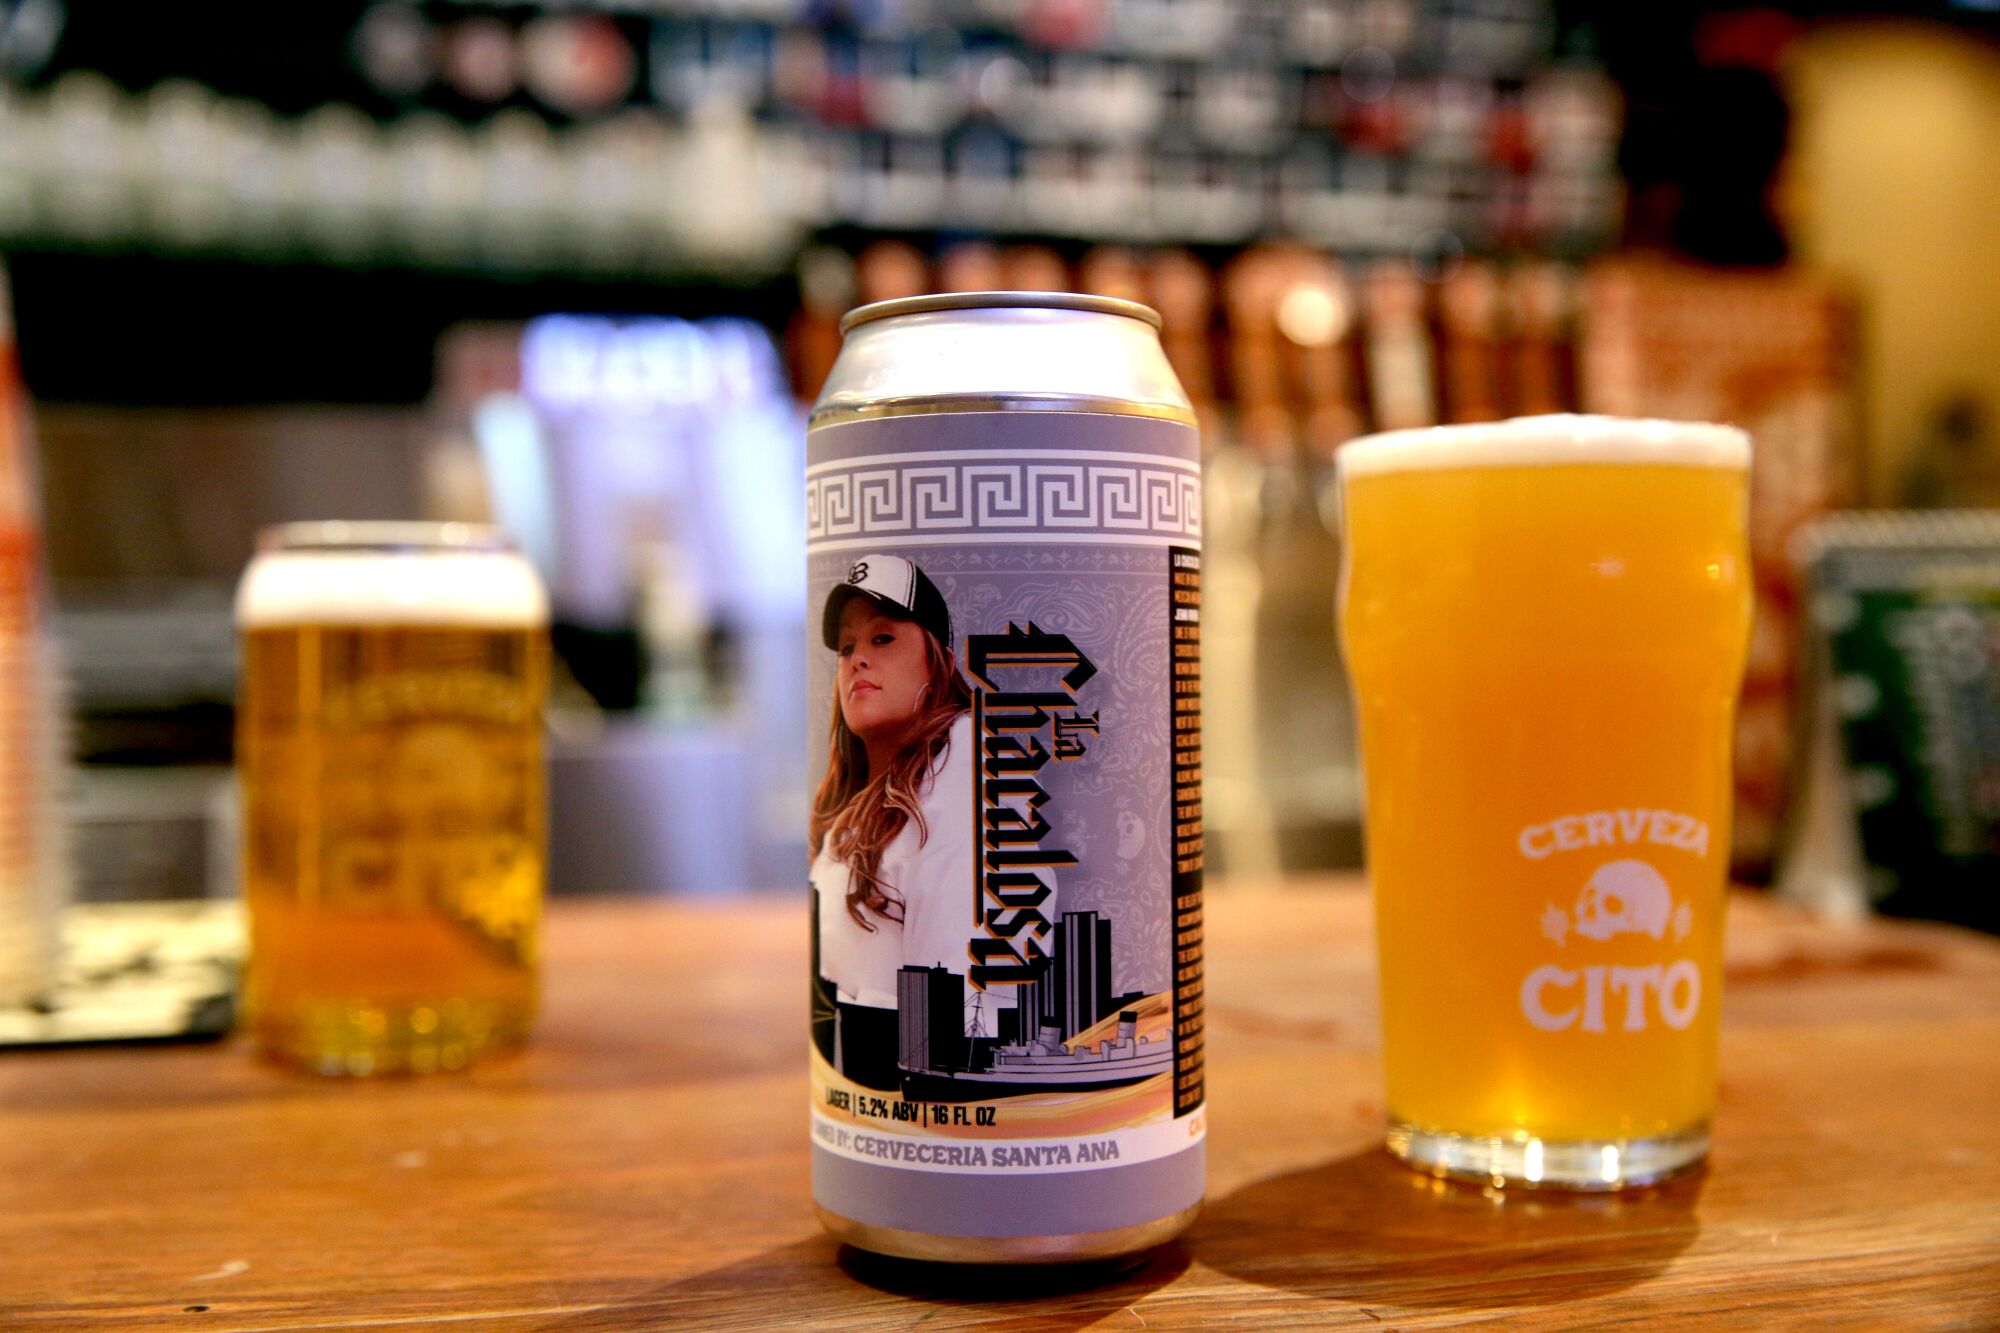 La Chacalosa lager beer, created in honor of late singer Jenni Rivera.